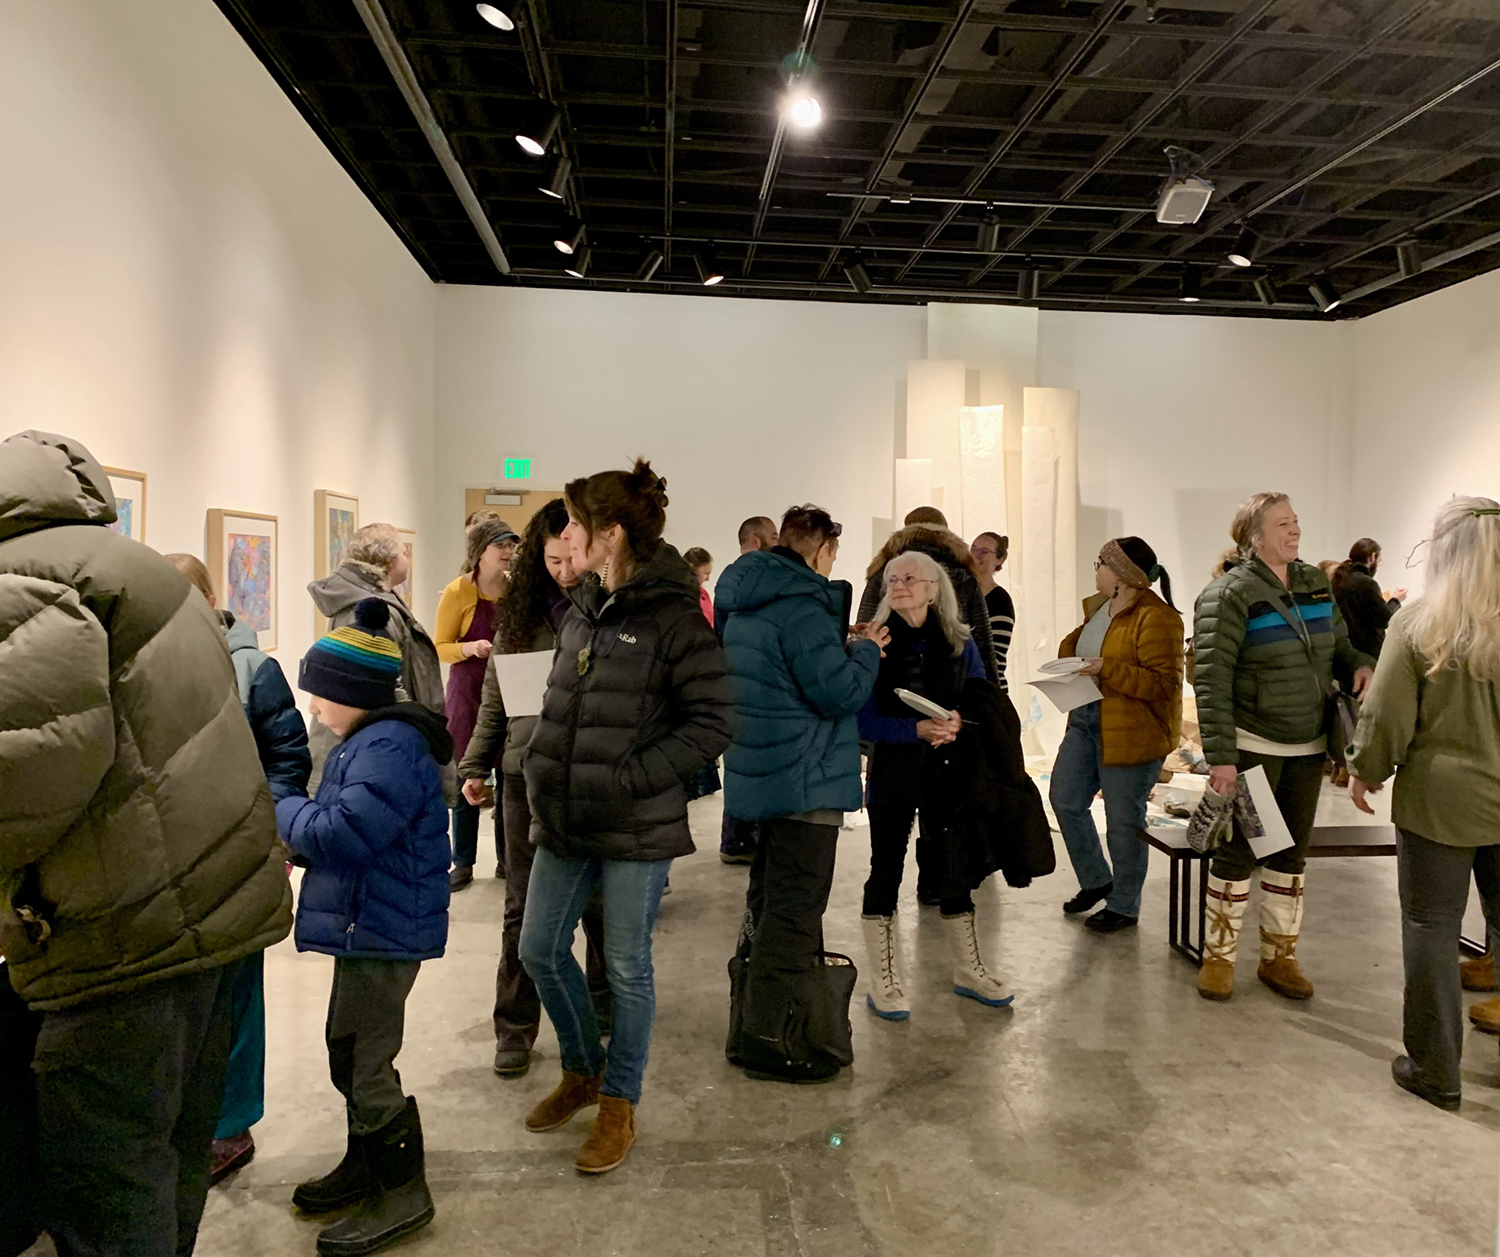 A crowd during the reception of Susan Andrews' MFA exhibition The Cascade Effect in the UAF Art Gallery. Image courtesy of the artist